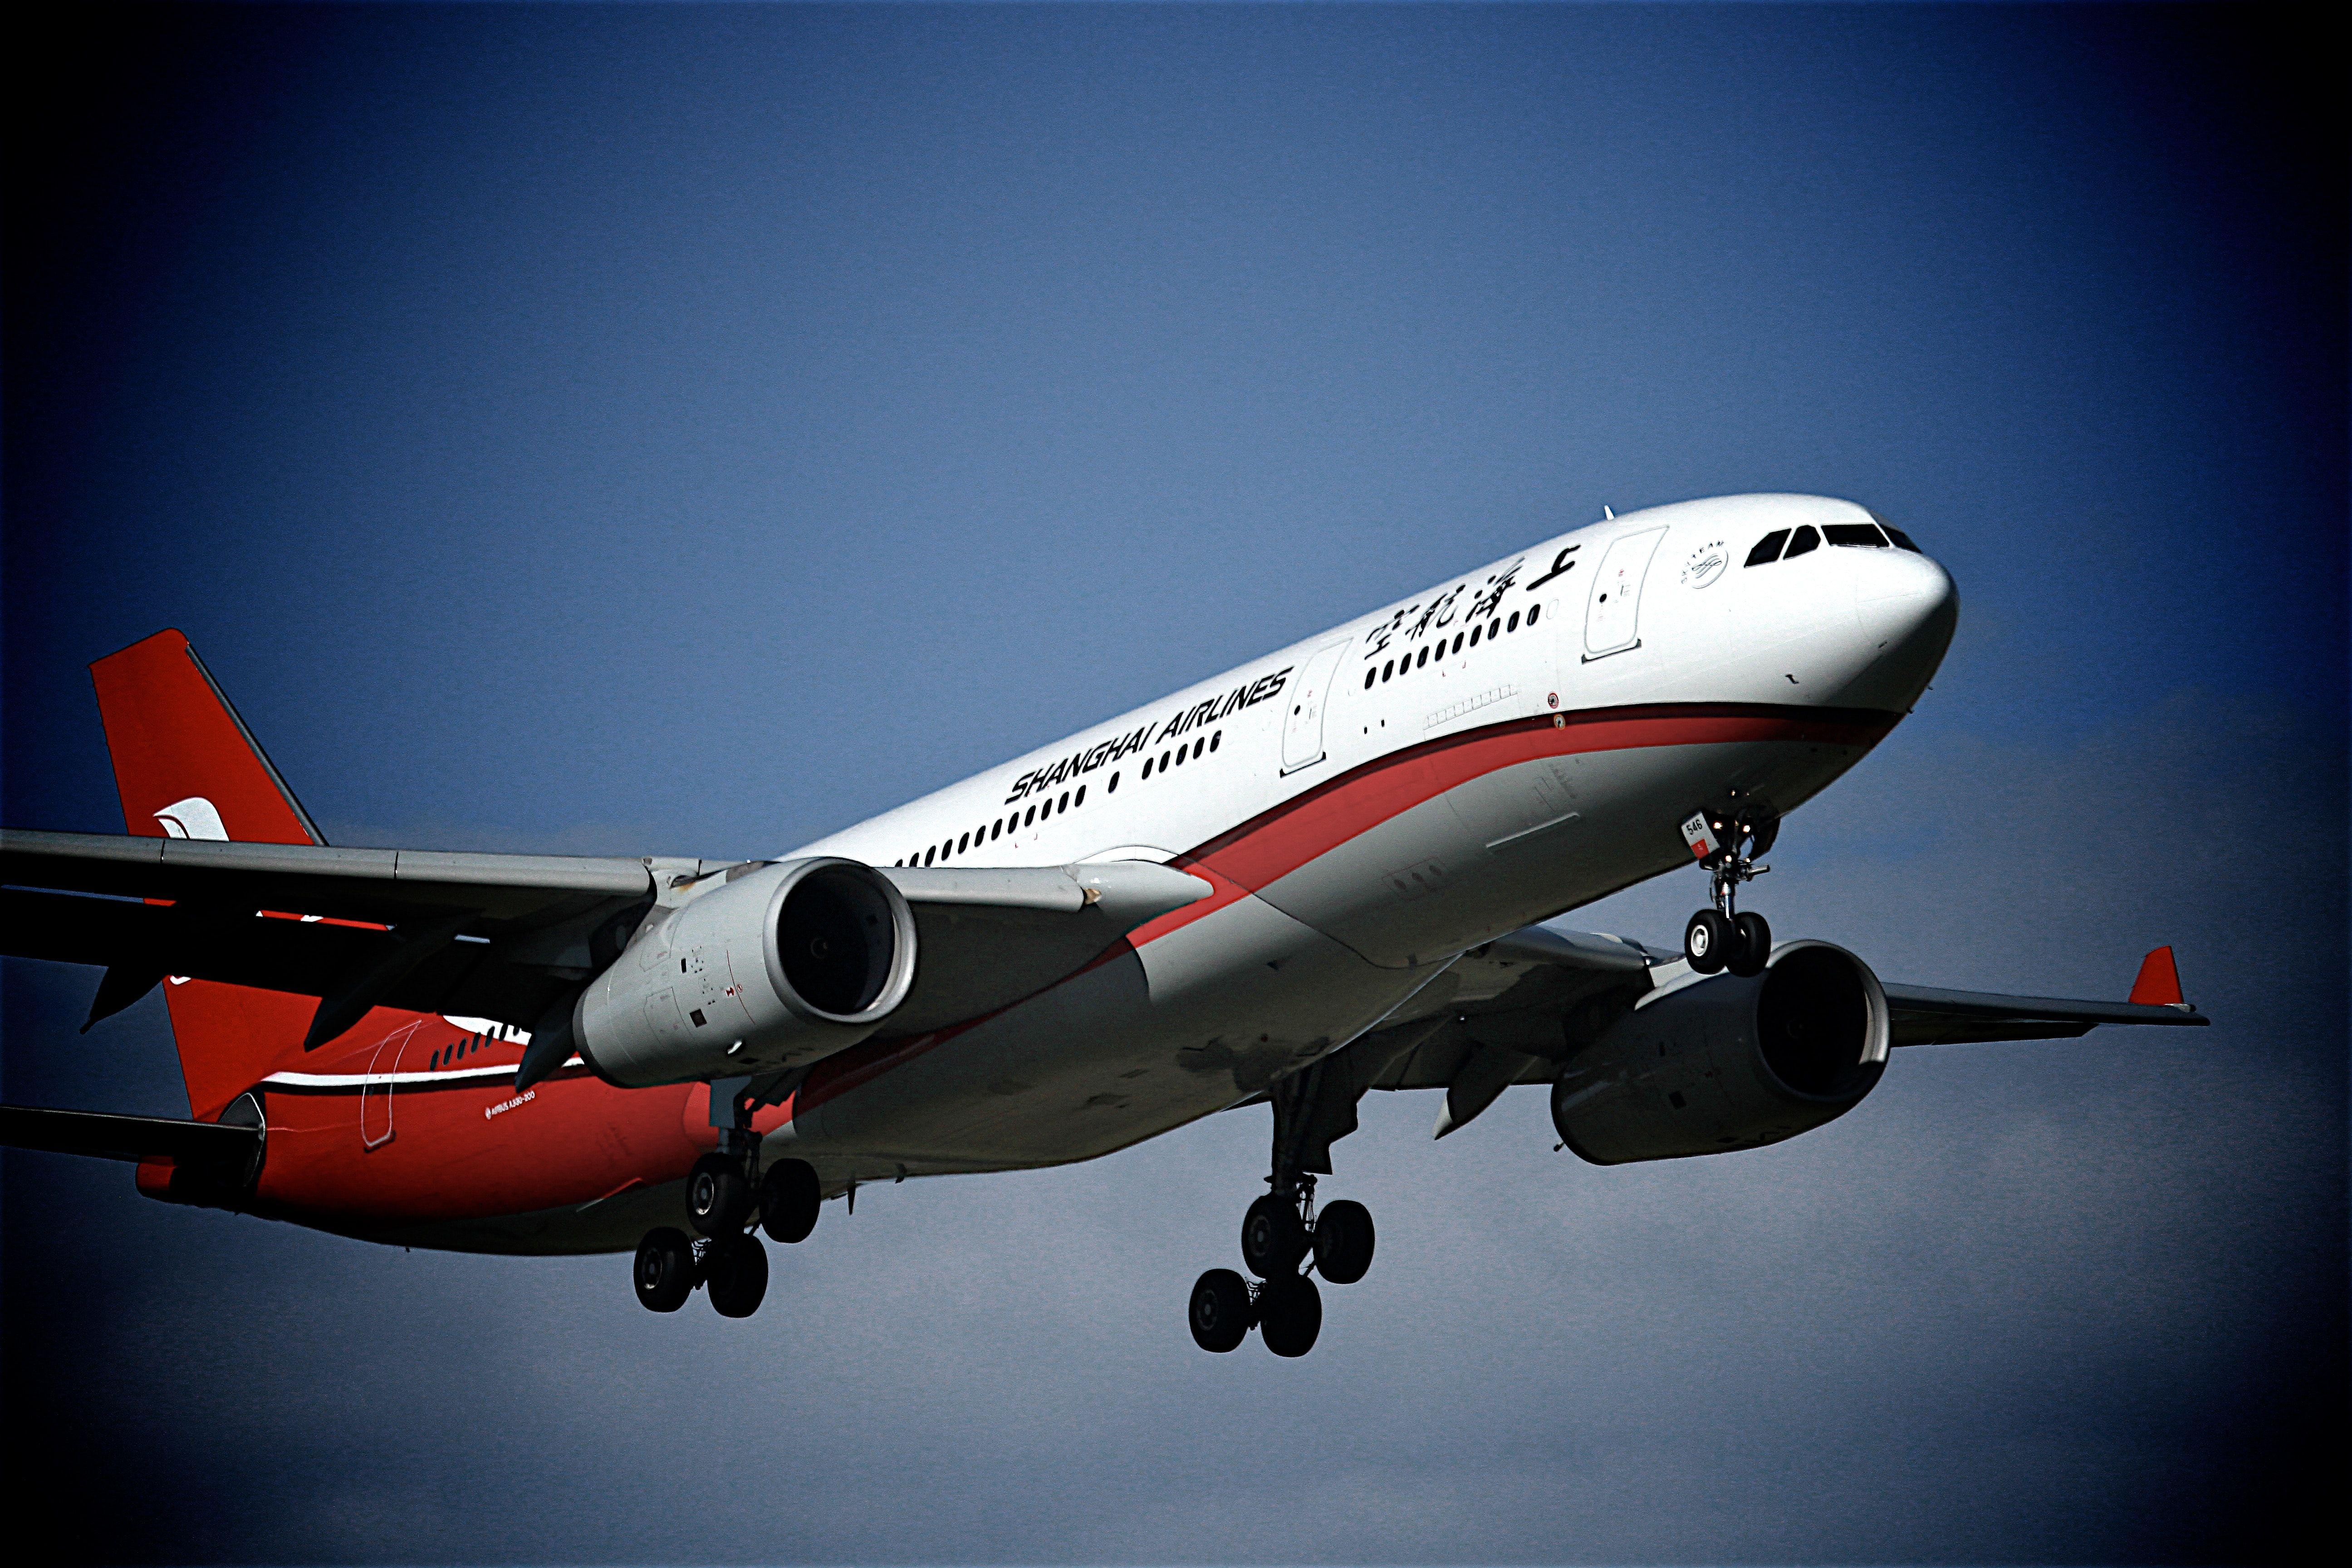 White and Red Airline Logo - White and Red Plane · Free Stock Photo